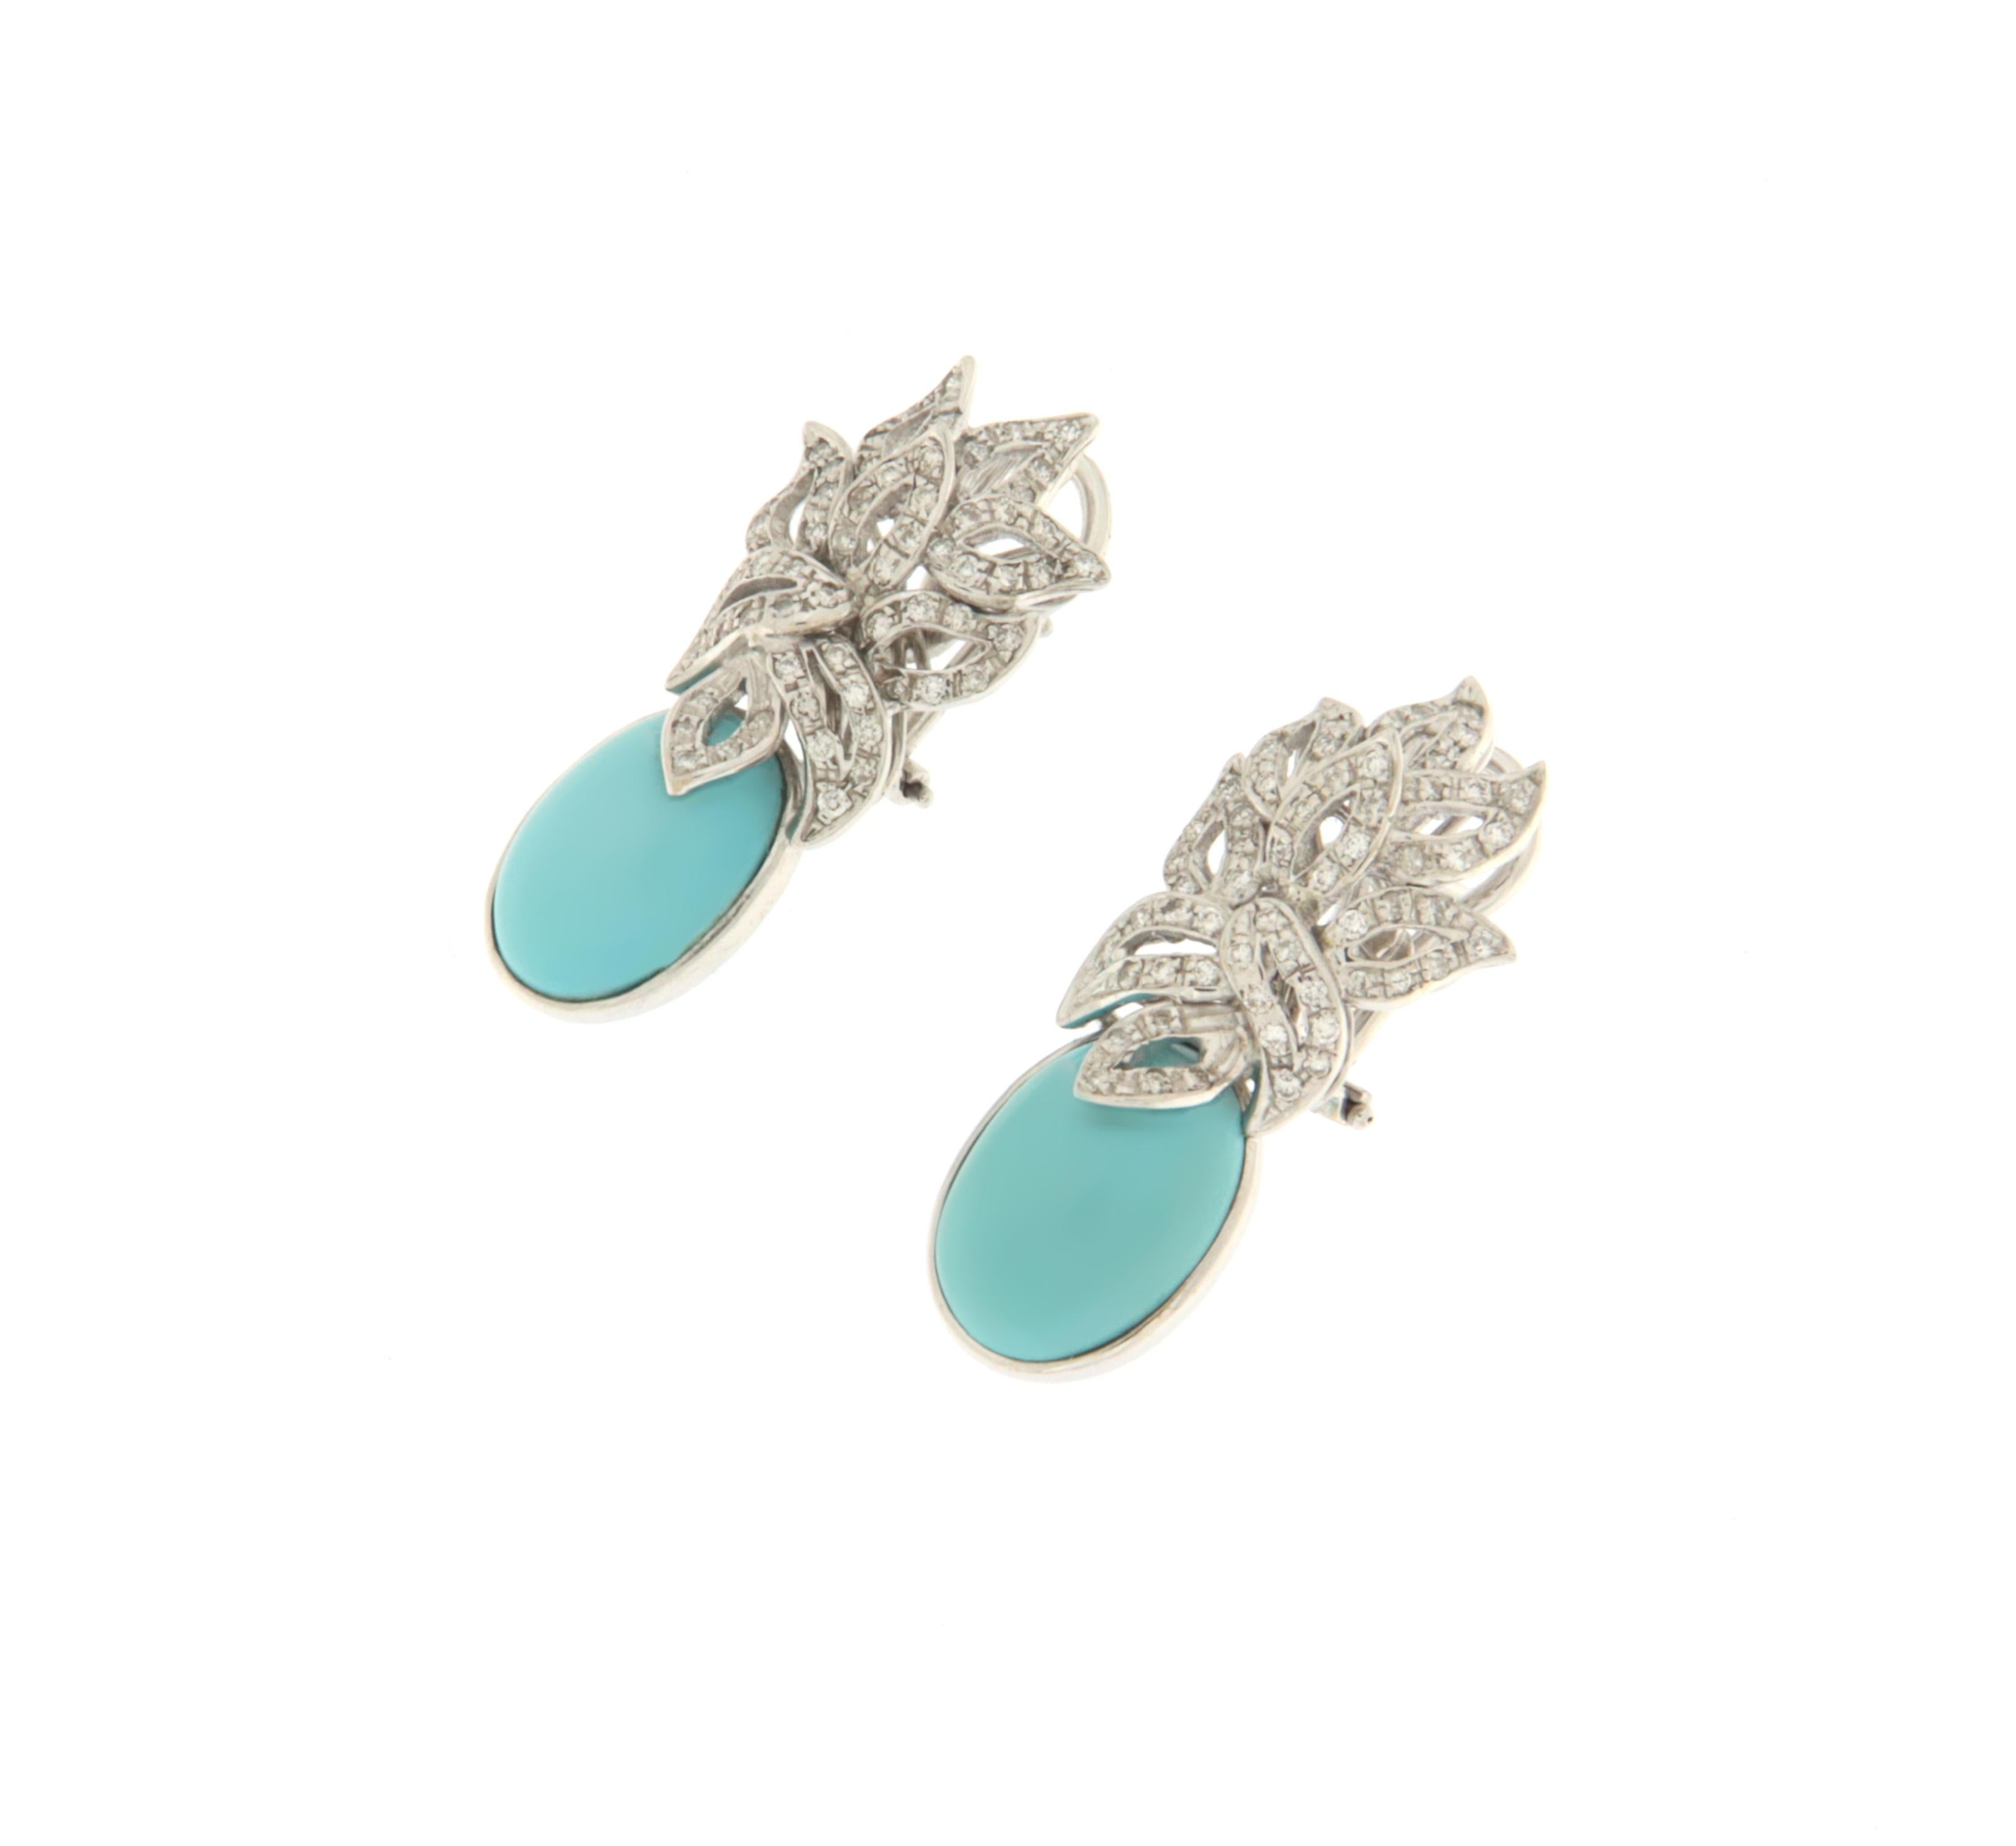 Fantastic earring made entirely by hand by expert master craftsmen. The two oval turquoise are supported by leaves covered with diamonds that intertwine with each other. Made of 18 Karat white gold with natural diamonds and turquoise.
An earring to